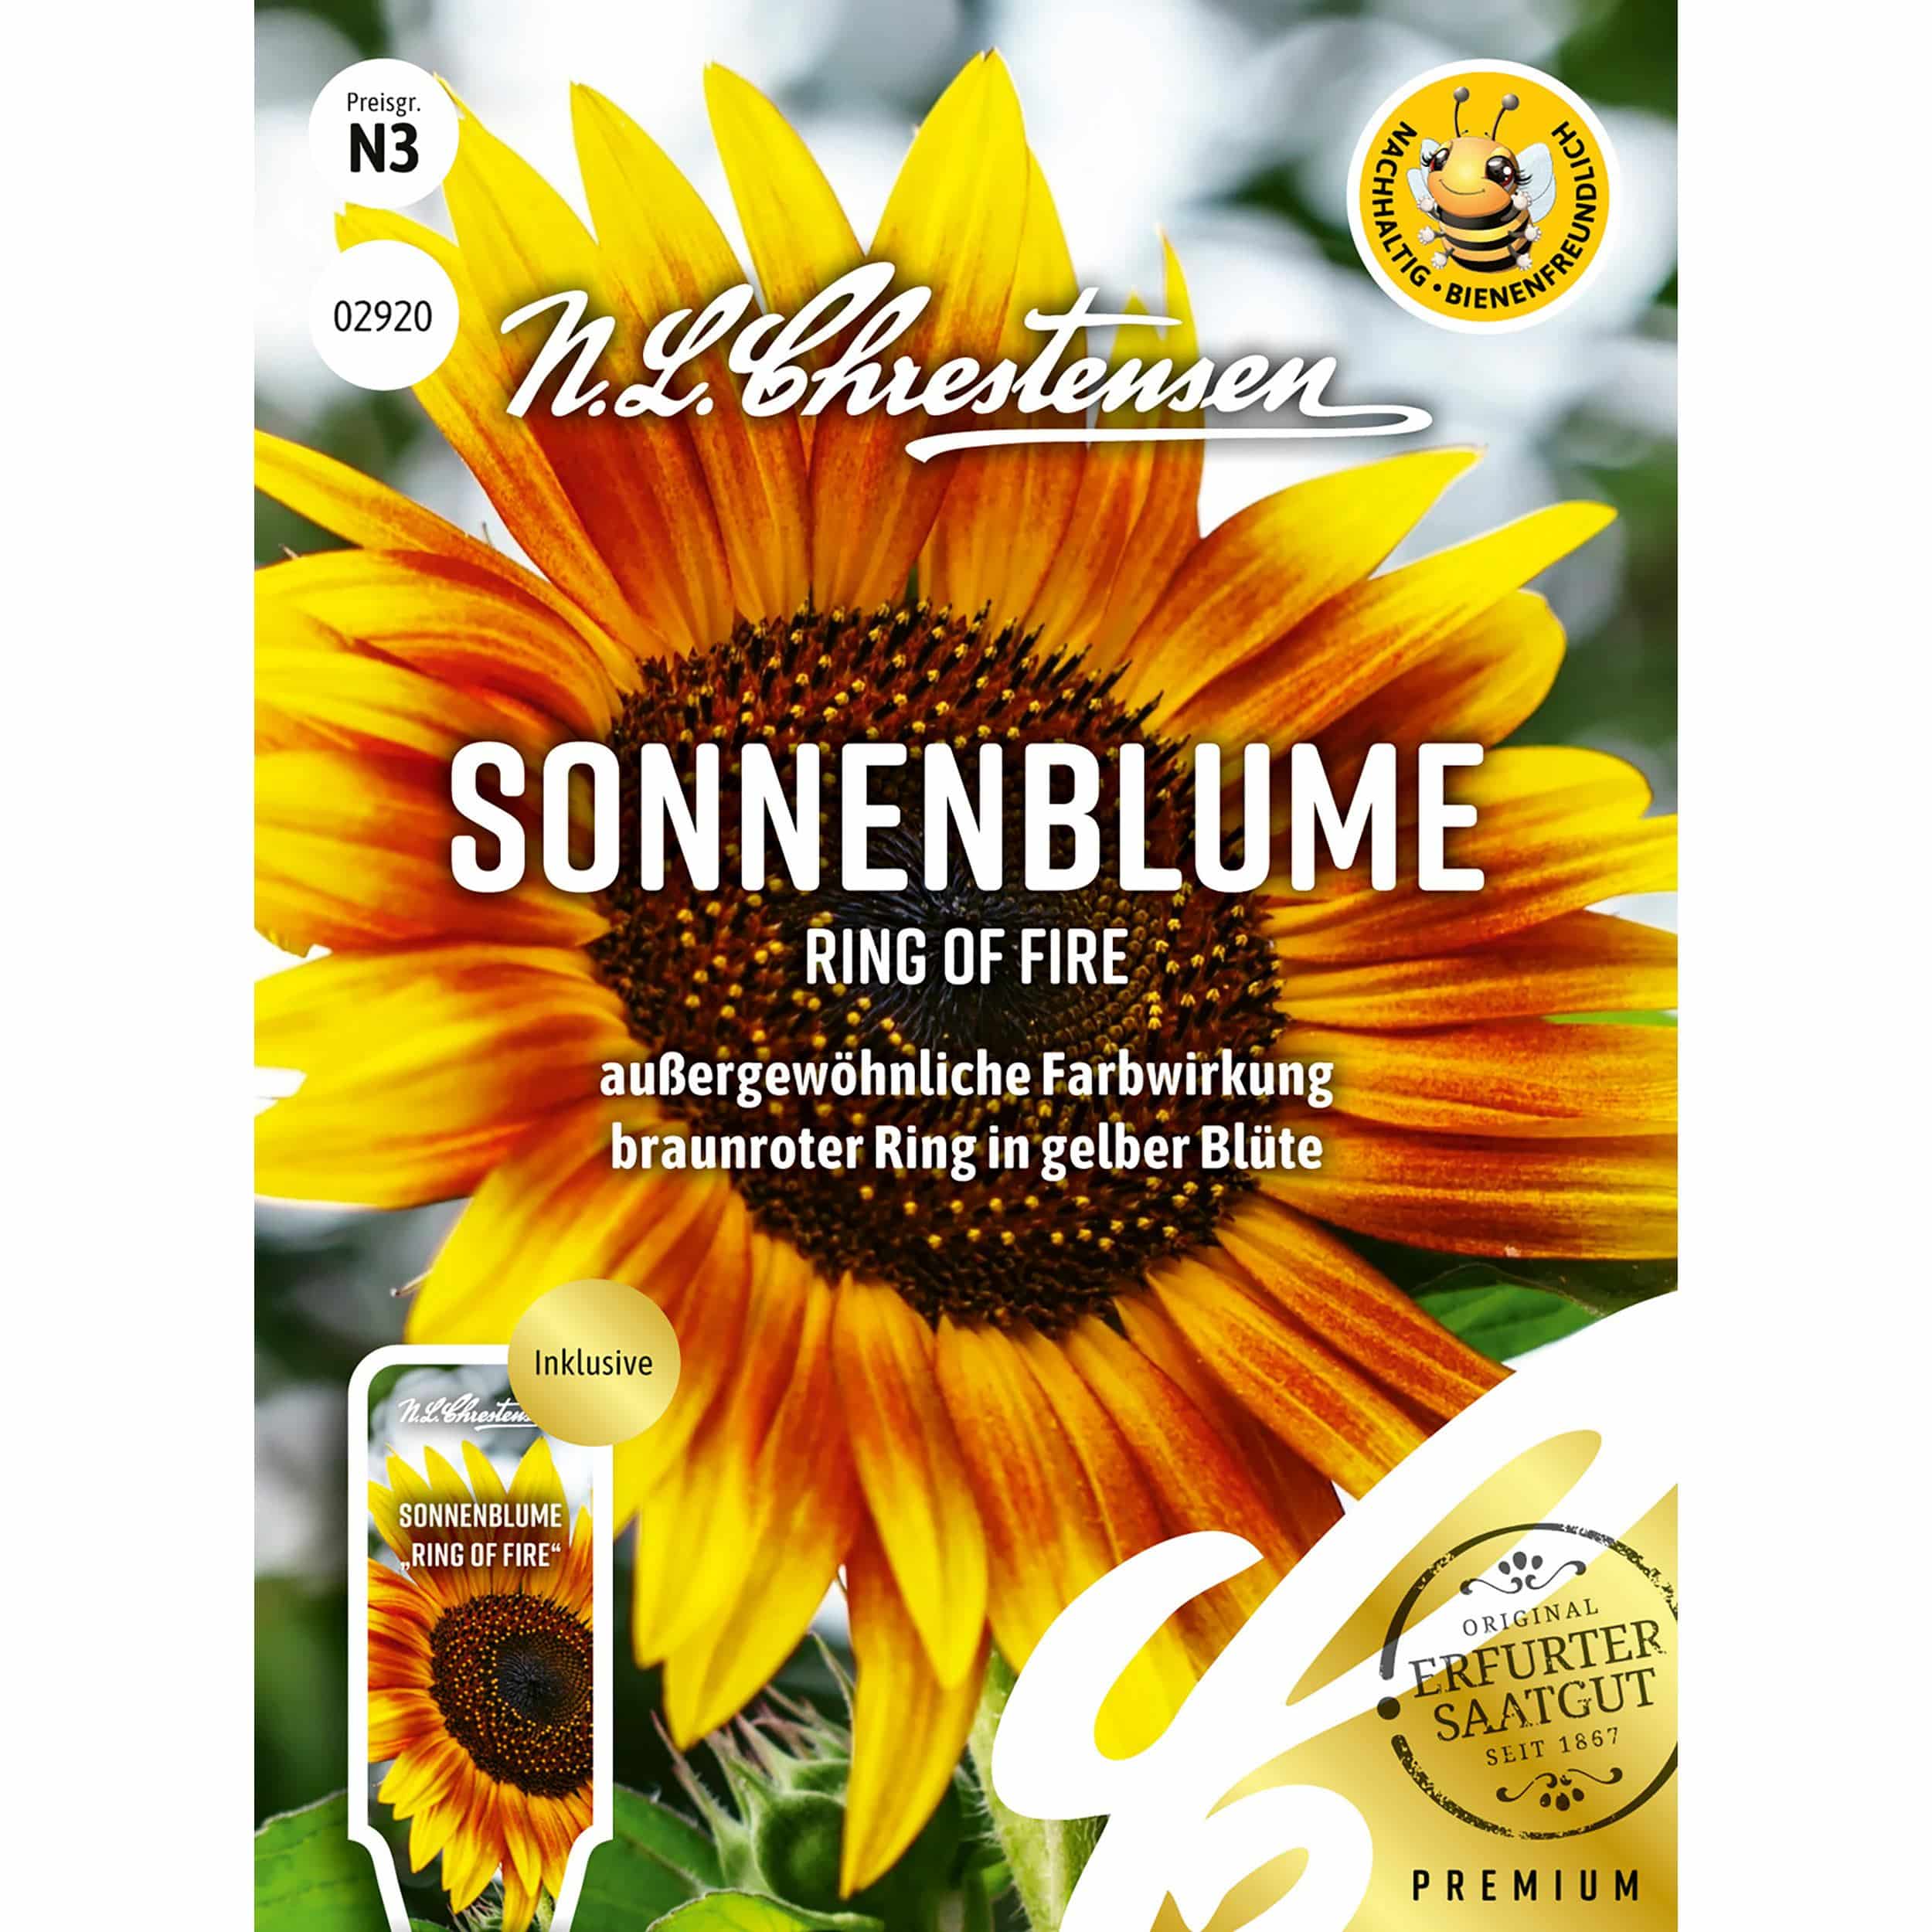 Sonnenblume Ring of Fire